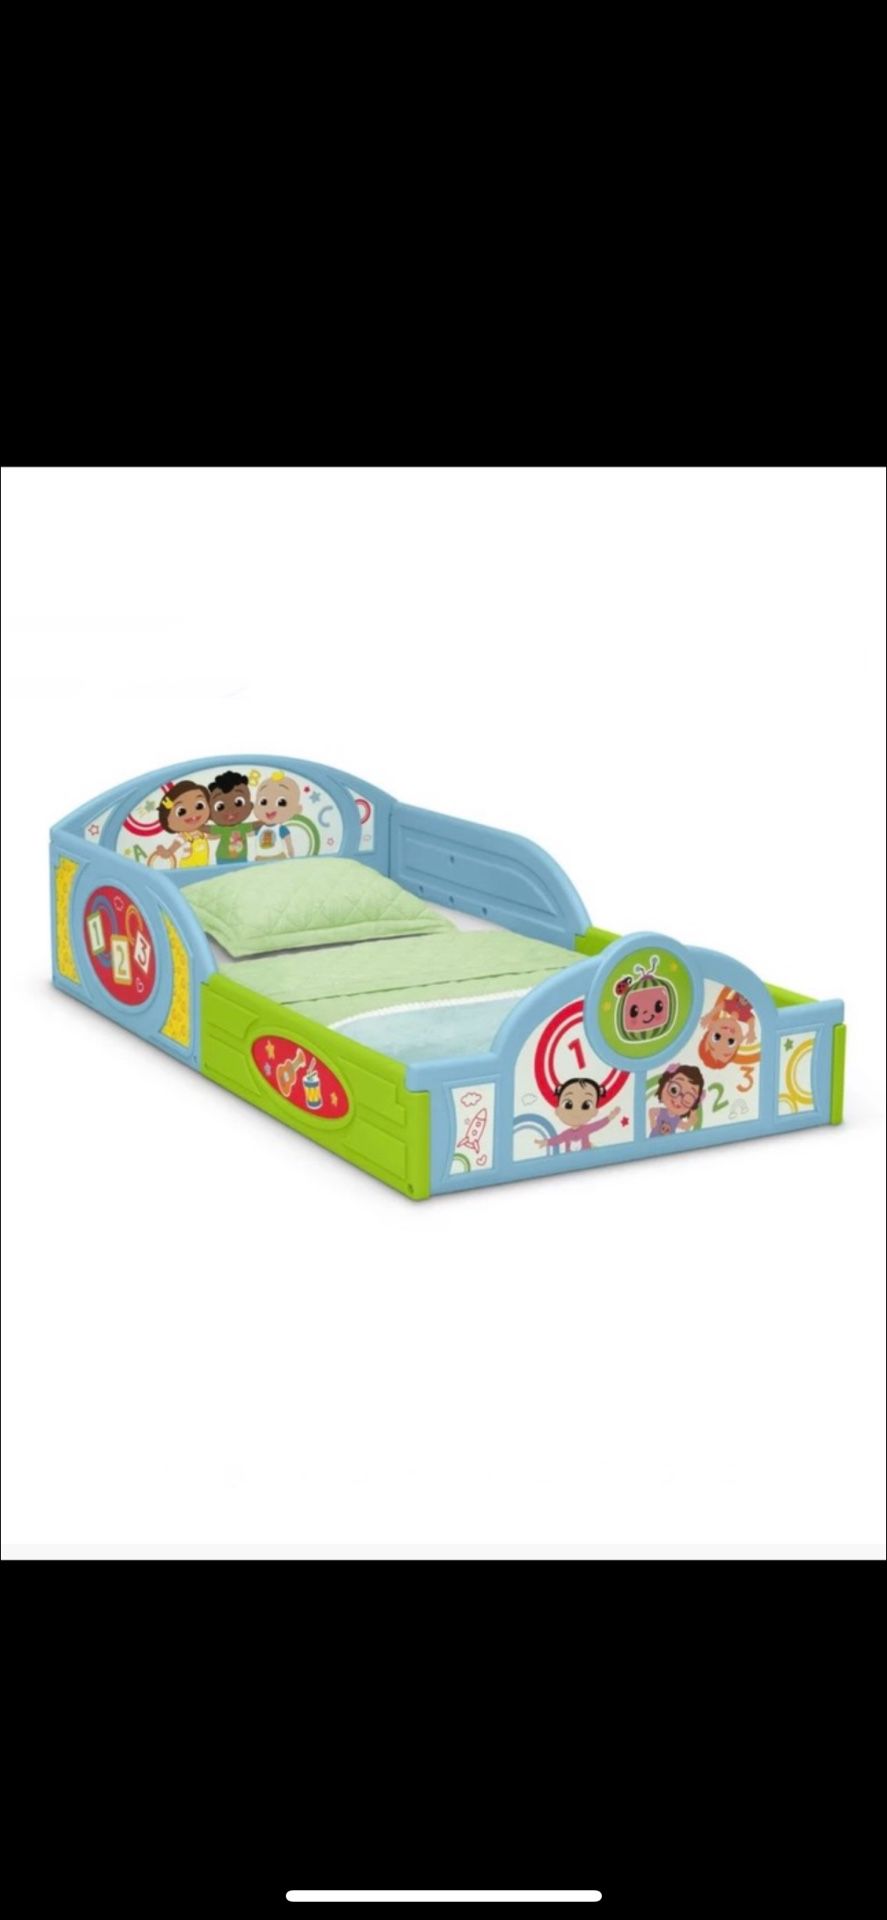 Coco Melon Plastic Toddler Bed Frame/ Bed/ Coco Melon/ Kids/ Toys/ Bedroom/ Furniture/ Sleep/ New